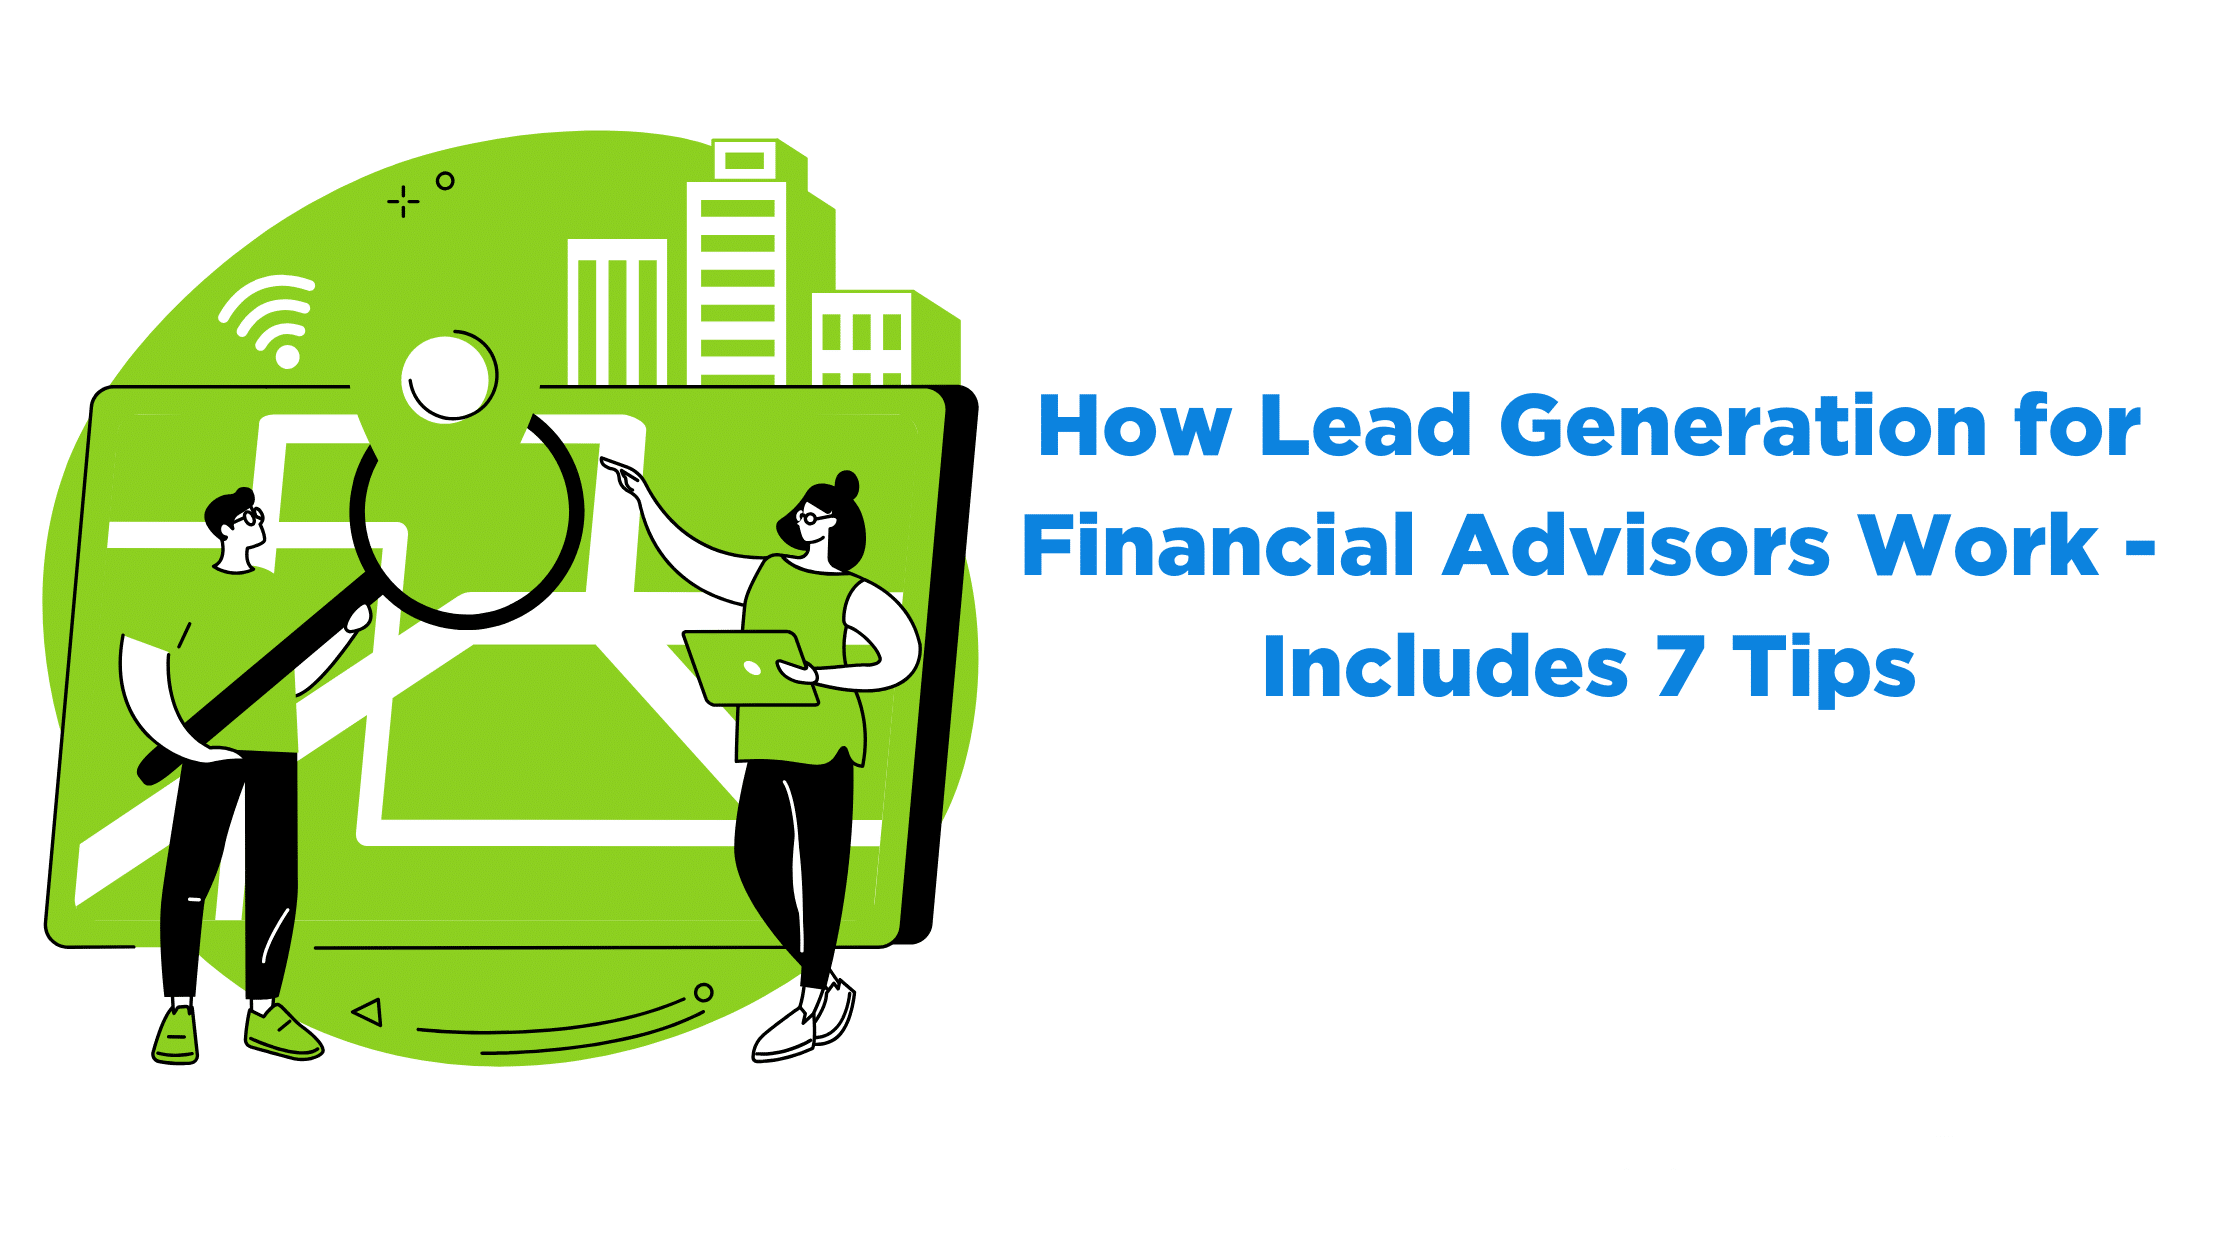 How Lead Generation for Financial Advisors